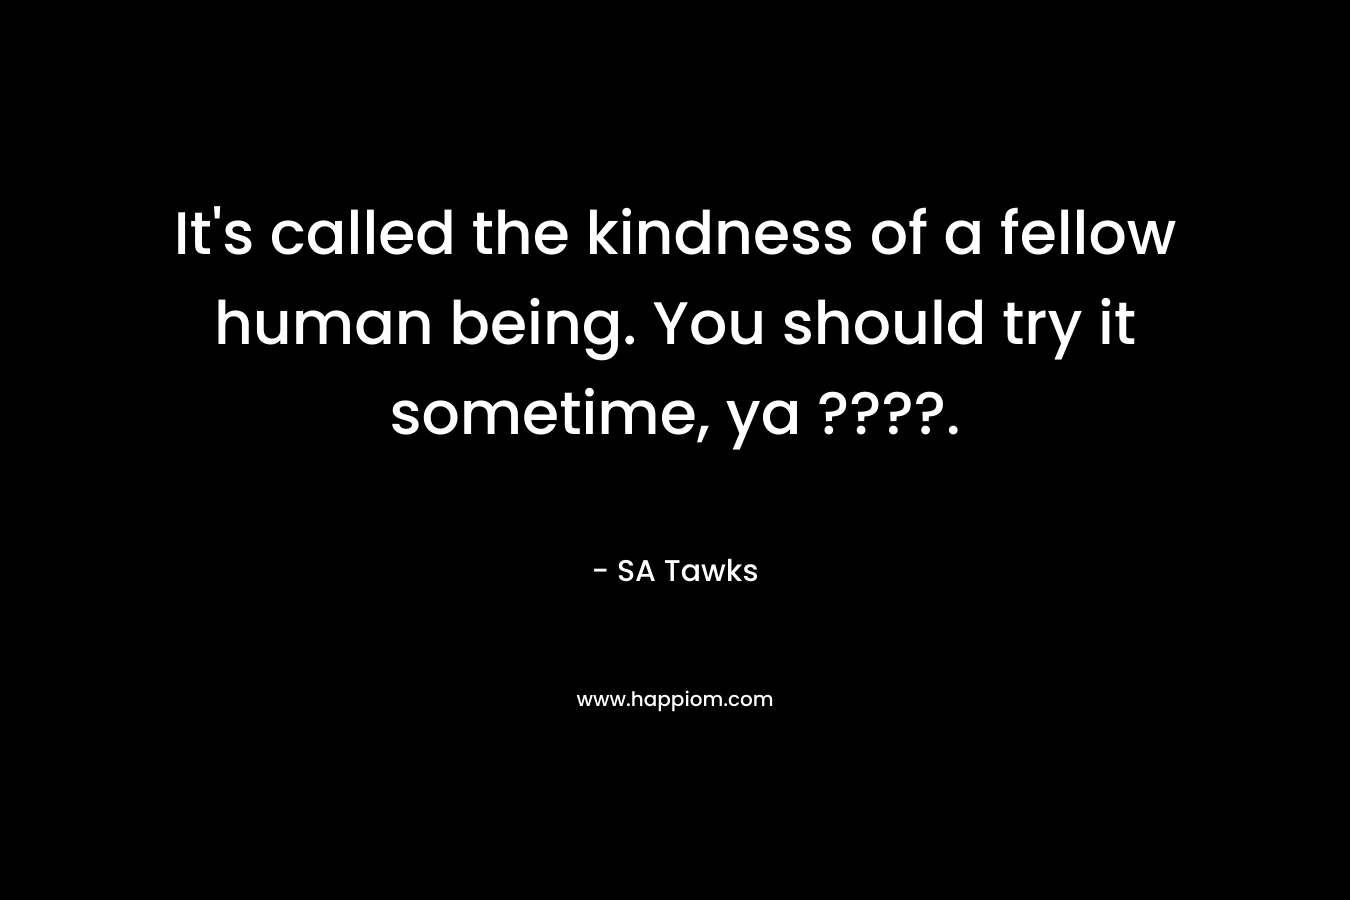 It's called the kindness of a fellow human being. You should try it sometime, ya ????.